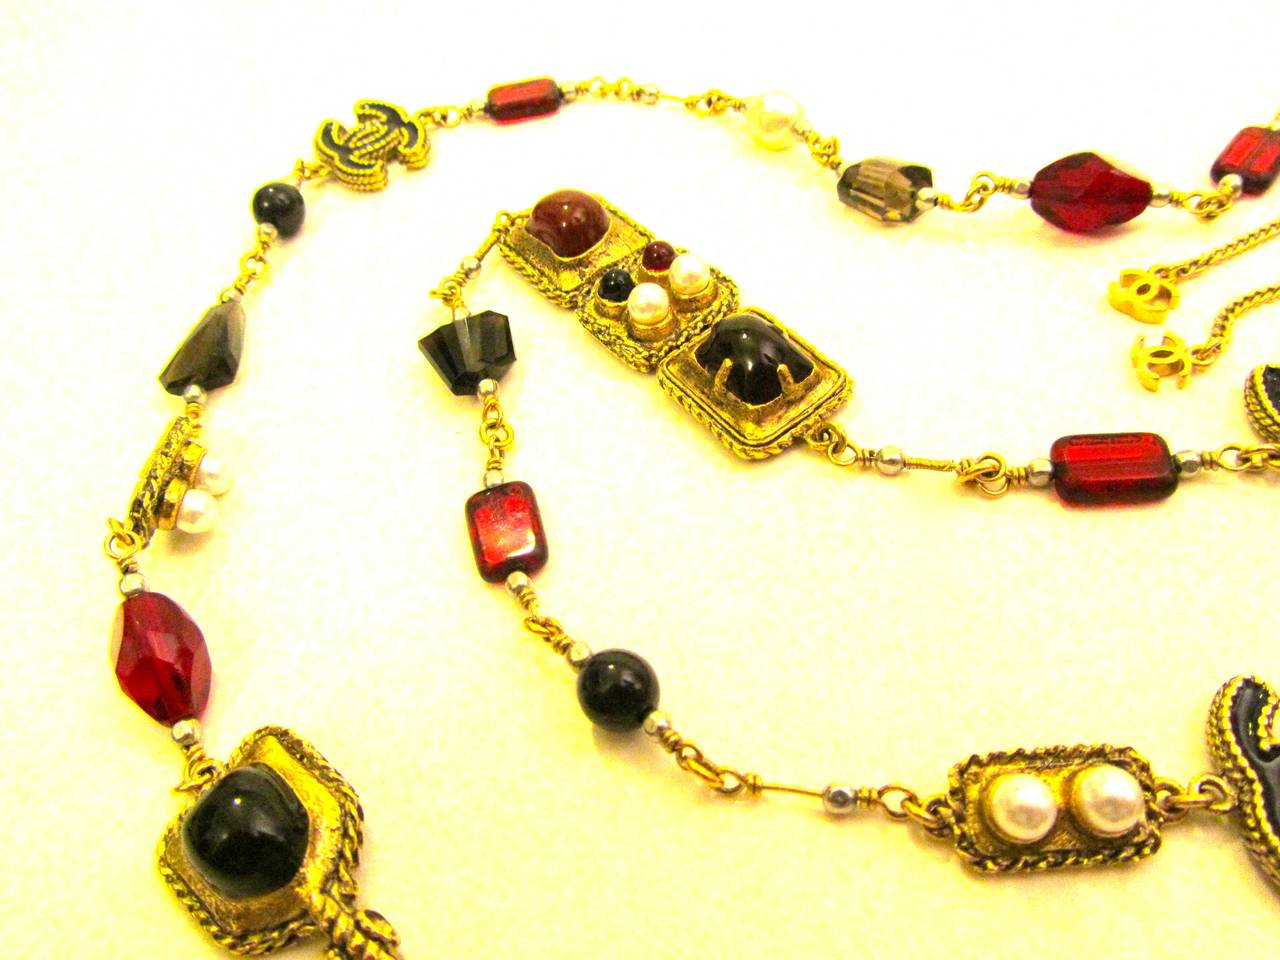 New Chanel necklace. Gold tone chain with faux pearls and alternating ornate gripoix stone inlay. Red, black, and gray gripoix stones. Black and gold CC logos on necklace. Rare and gorgeous necklace that is versatile for various occasions.